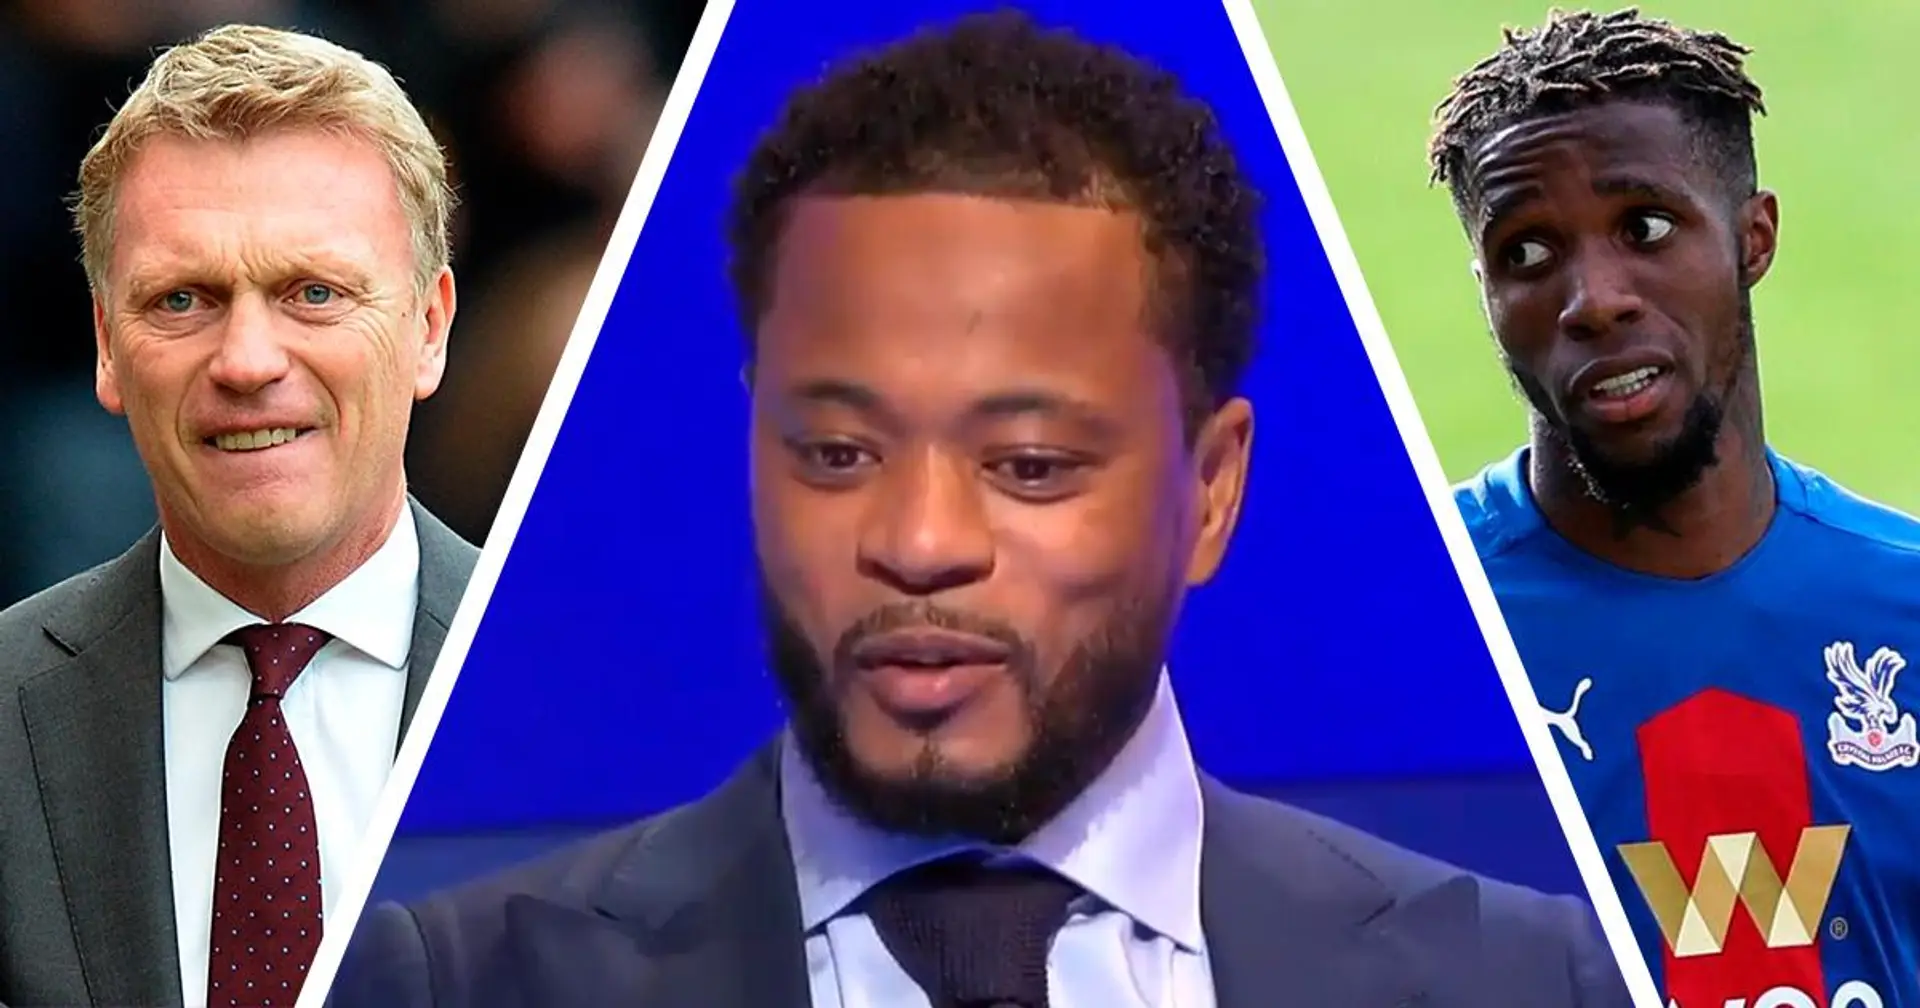 Sky Sports apologise for Patrice Evra's 'false claim' about Wilfried Zaha and David Moyes' daughter